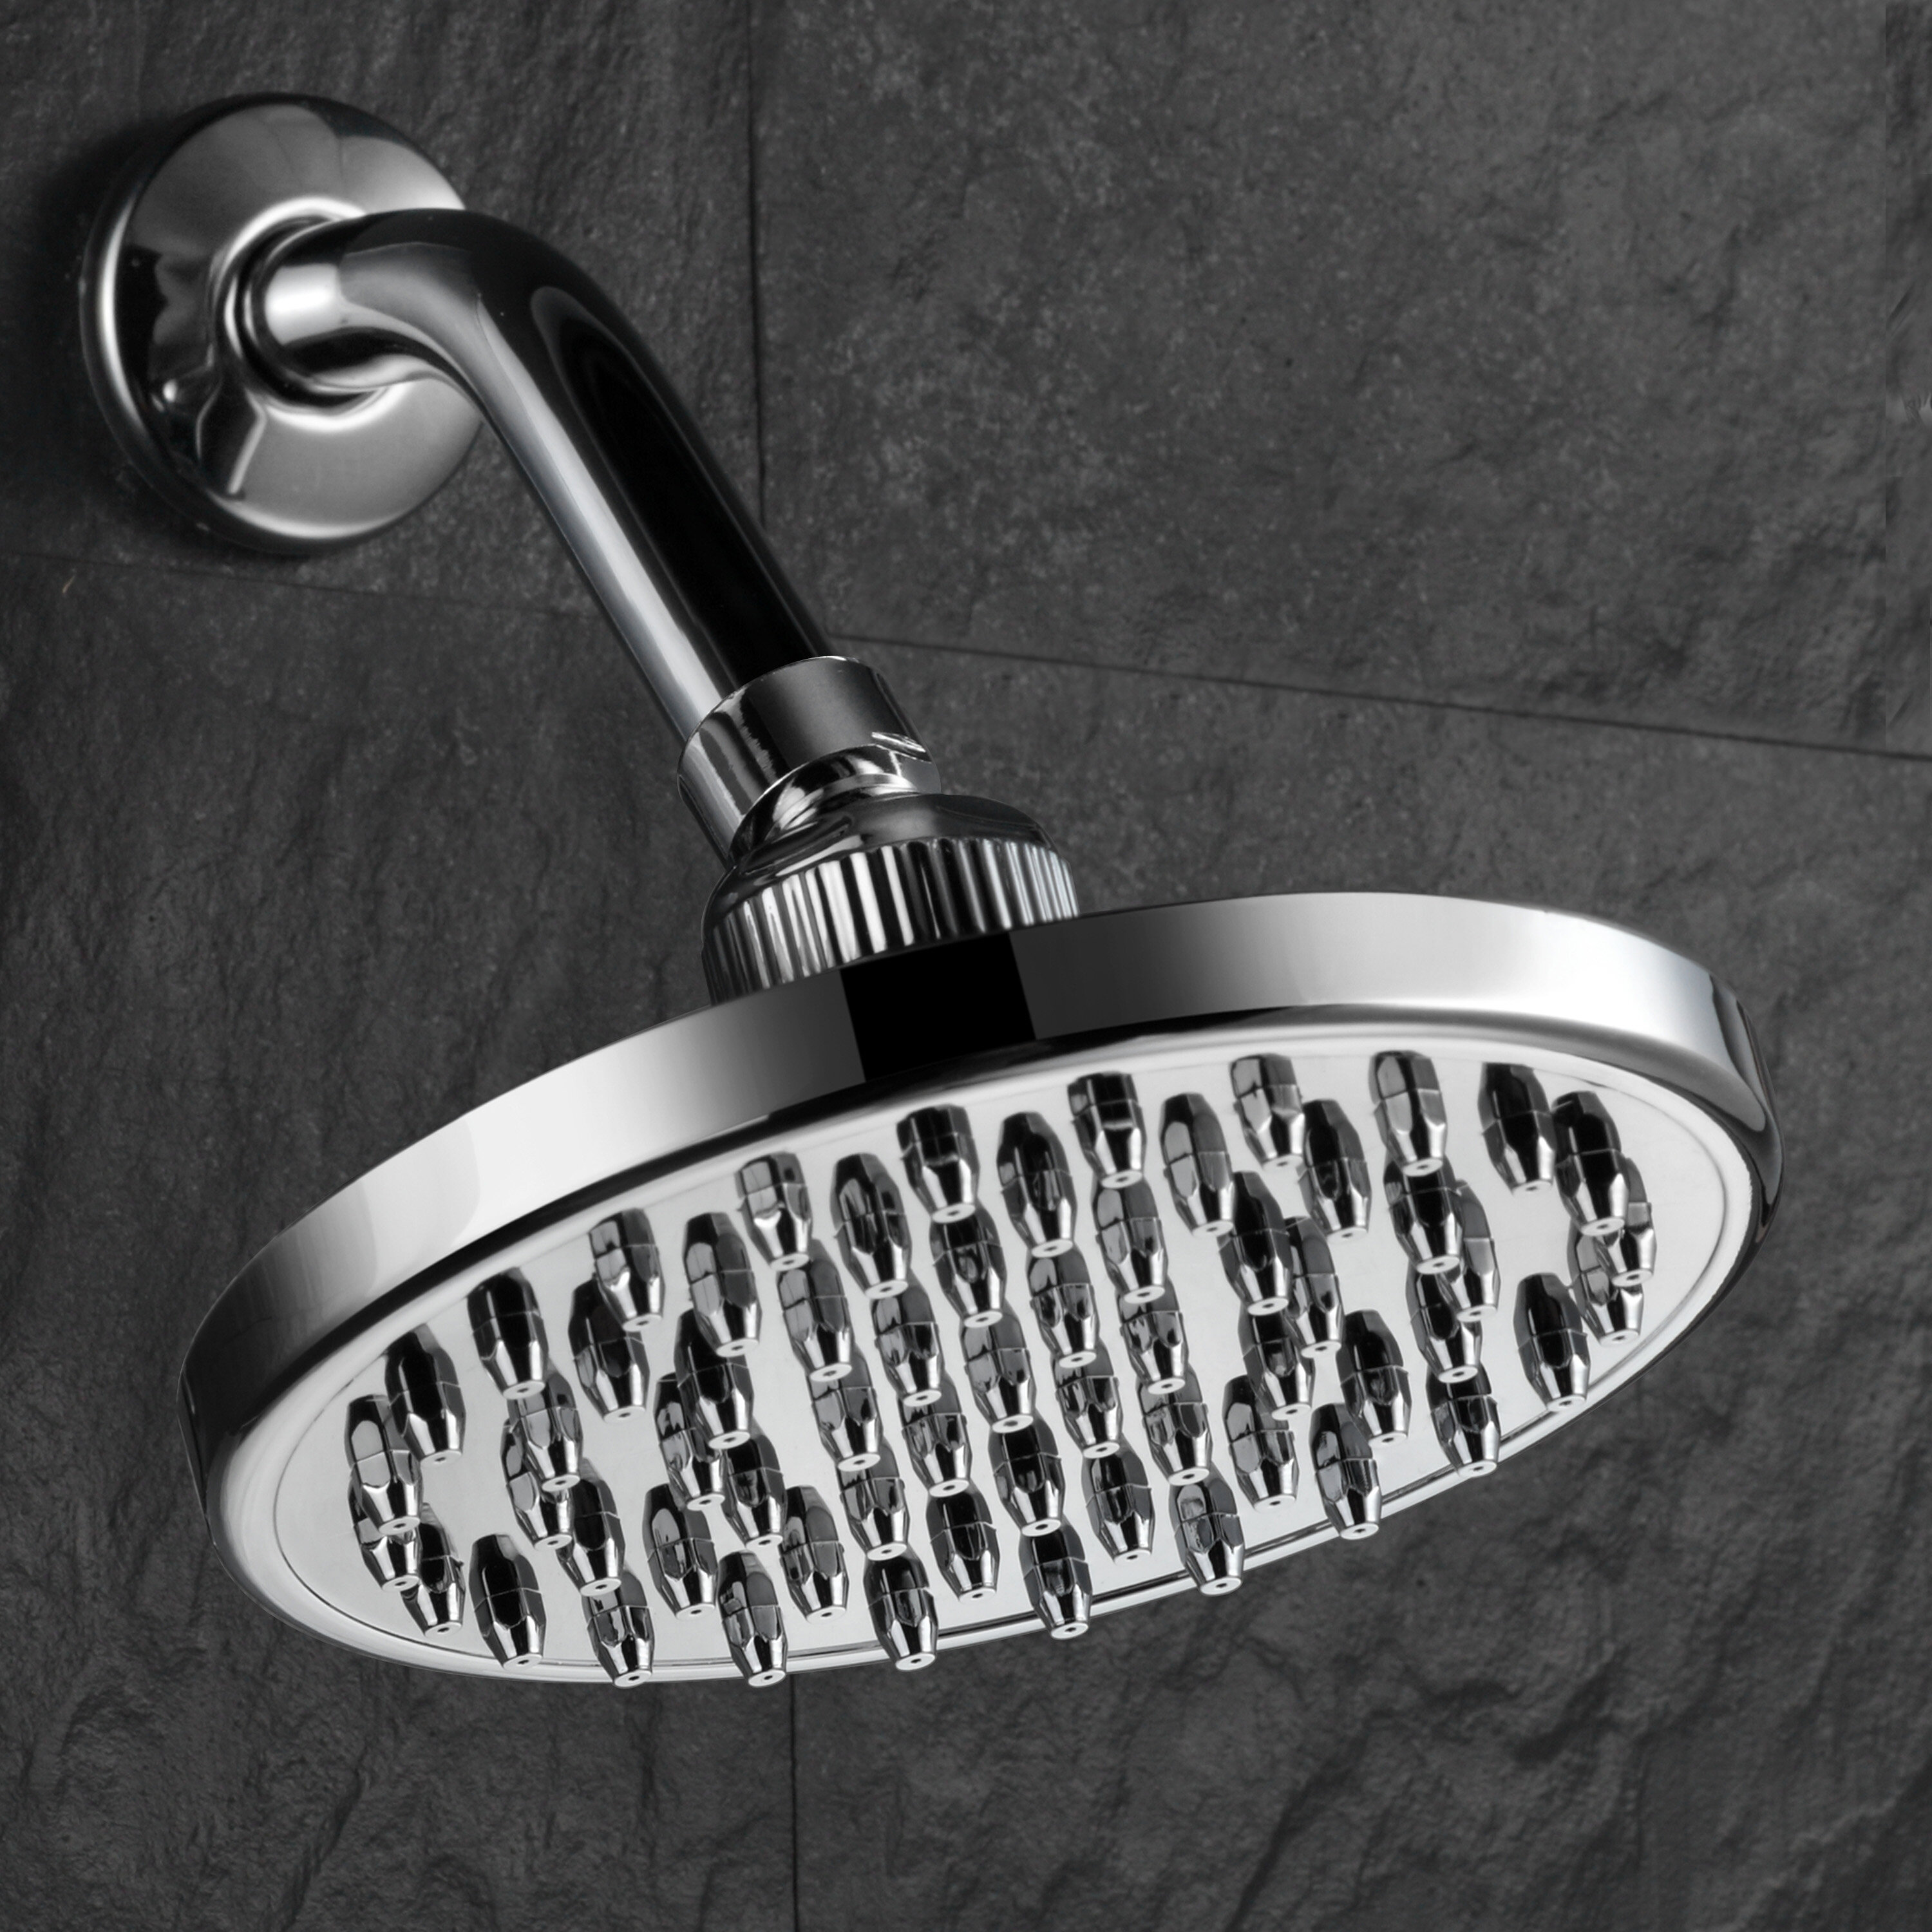 Can be Registered QBP Scalar Energy & Germanium Shower Head SPA Multifunctional Shower Head